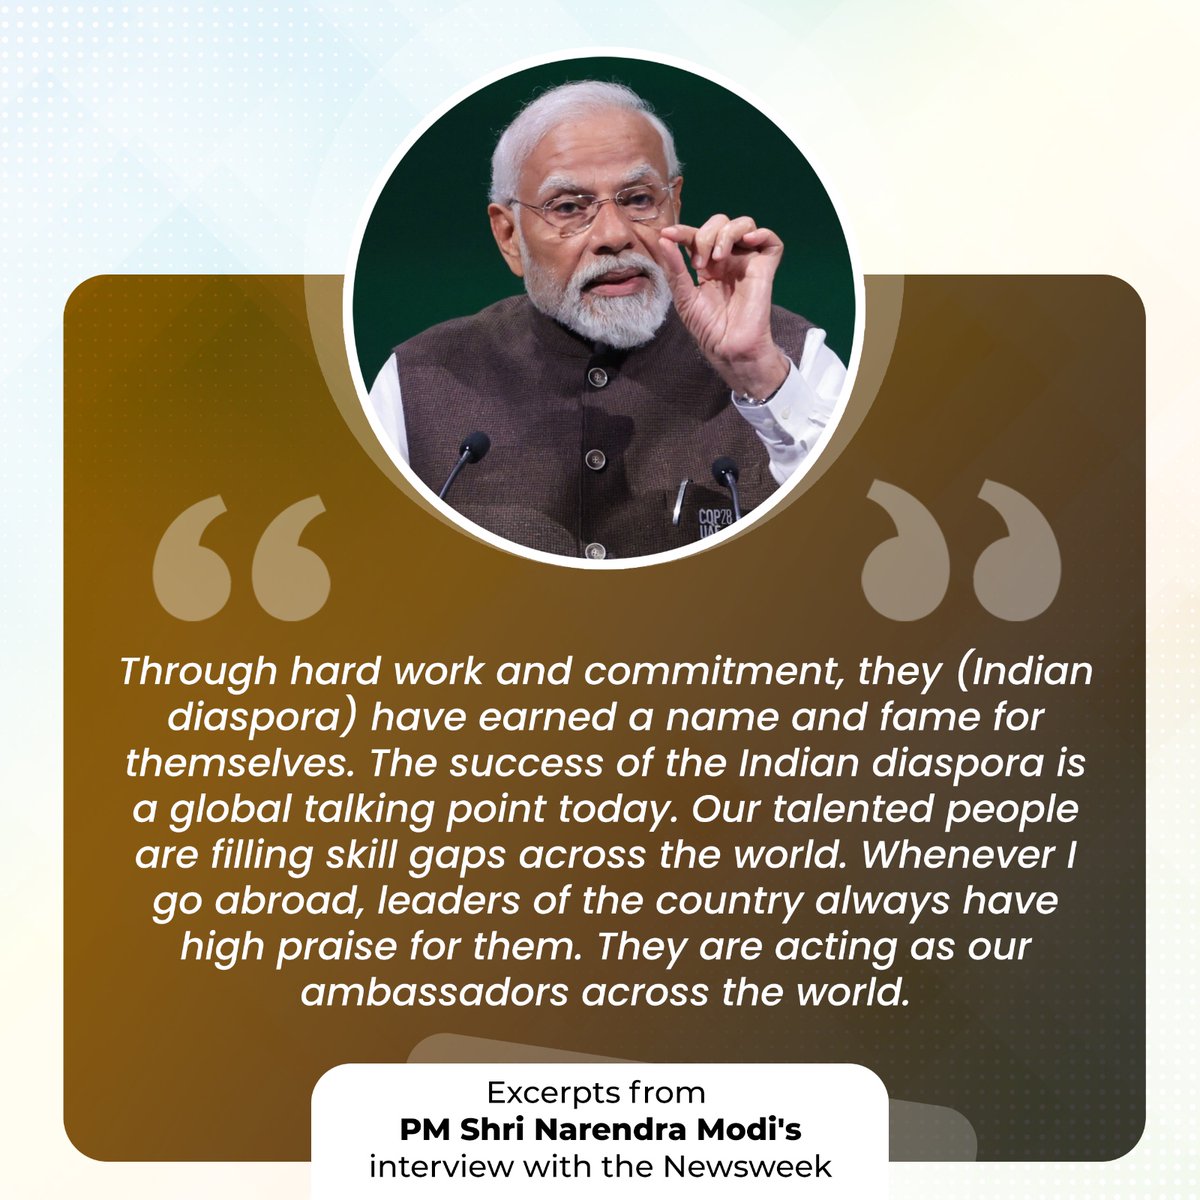 The success of the Indian diaspora is a global talking point today. Our talented people are filling skill gaps across the world.

Excerpts from PM Shri @narendramodi's interview with Newsweek.